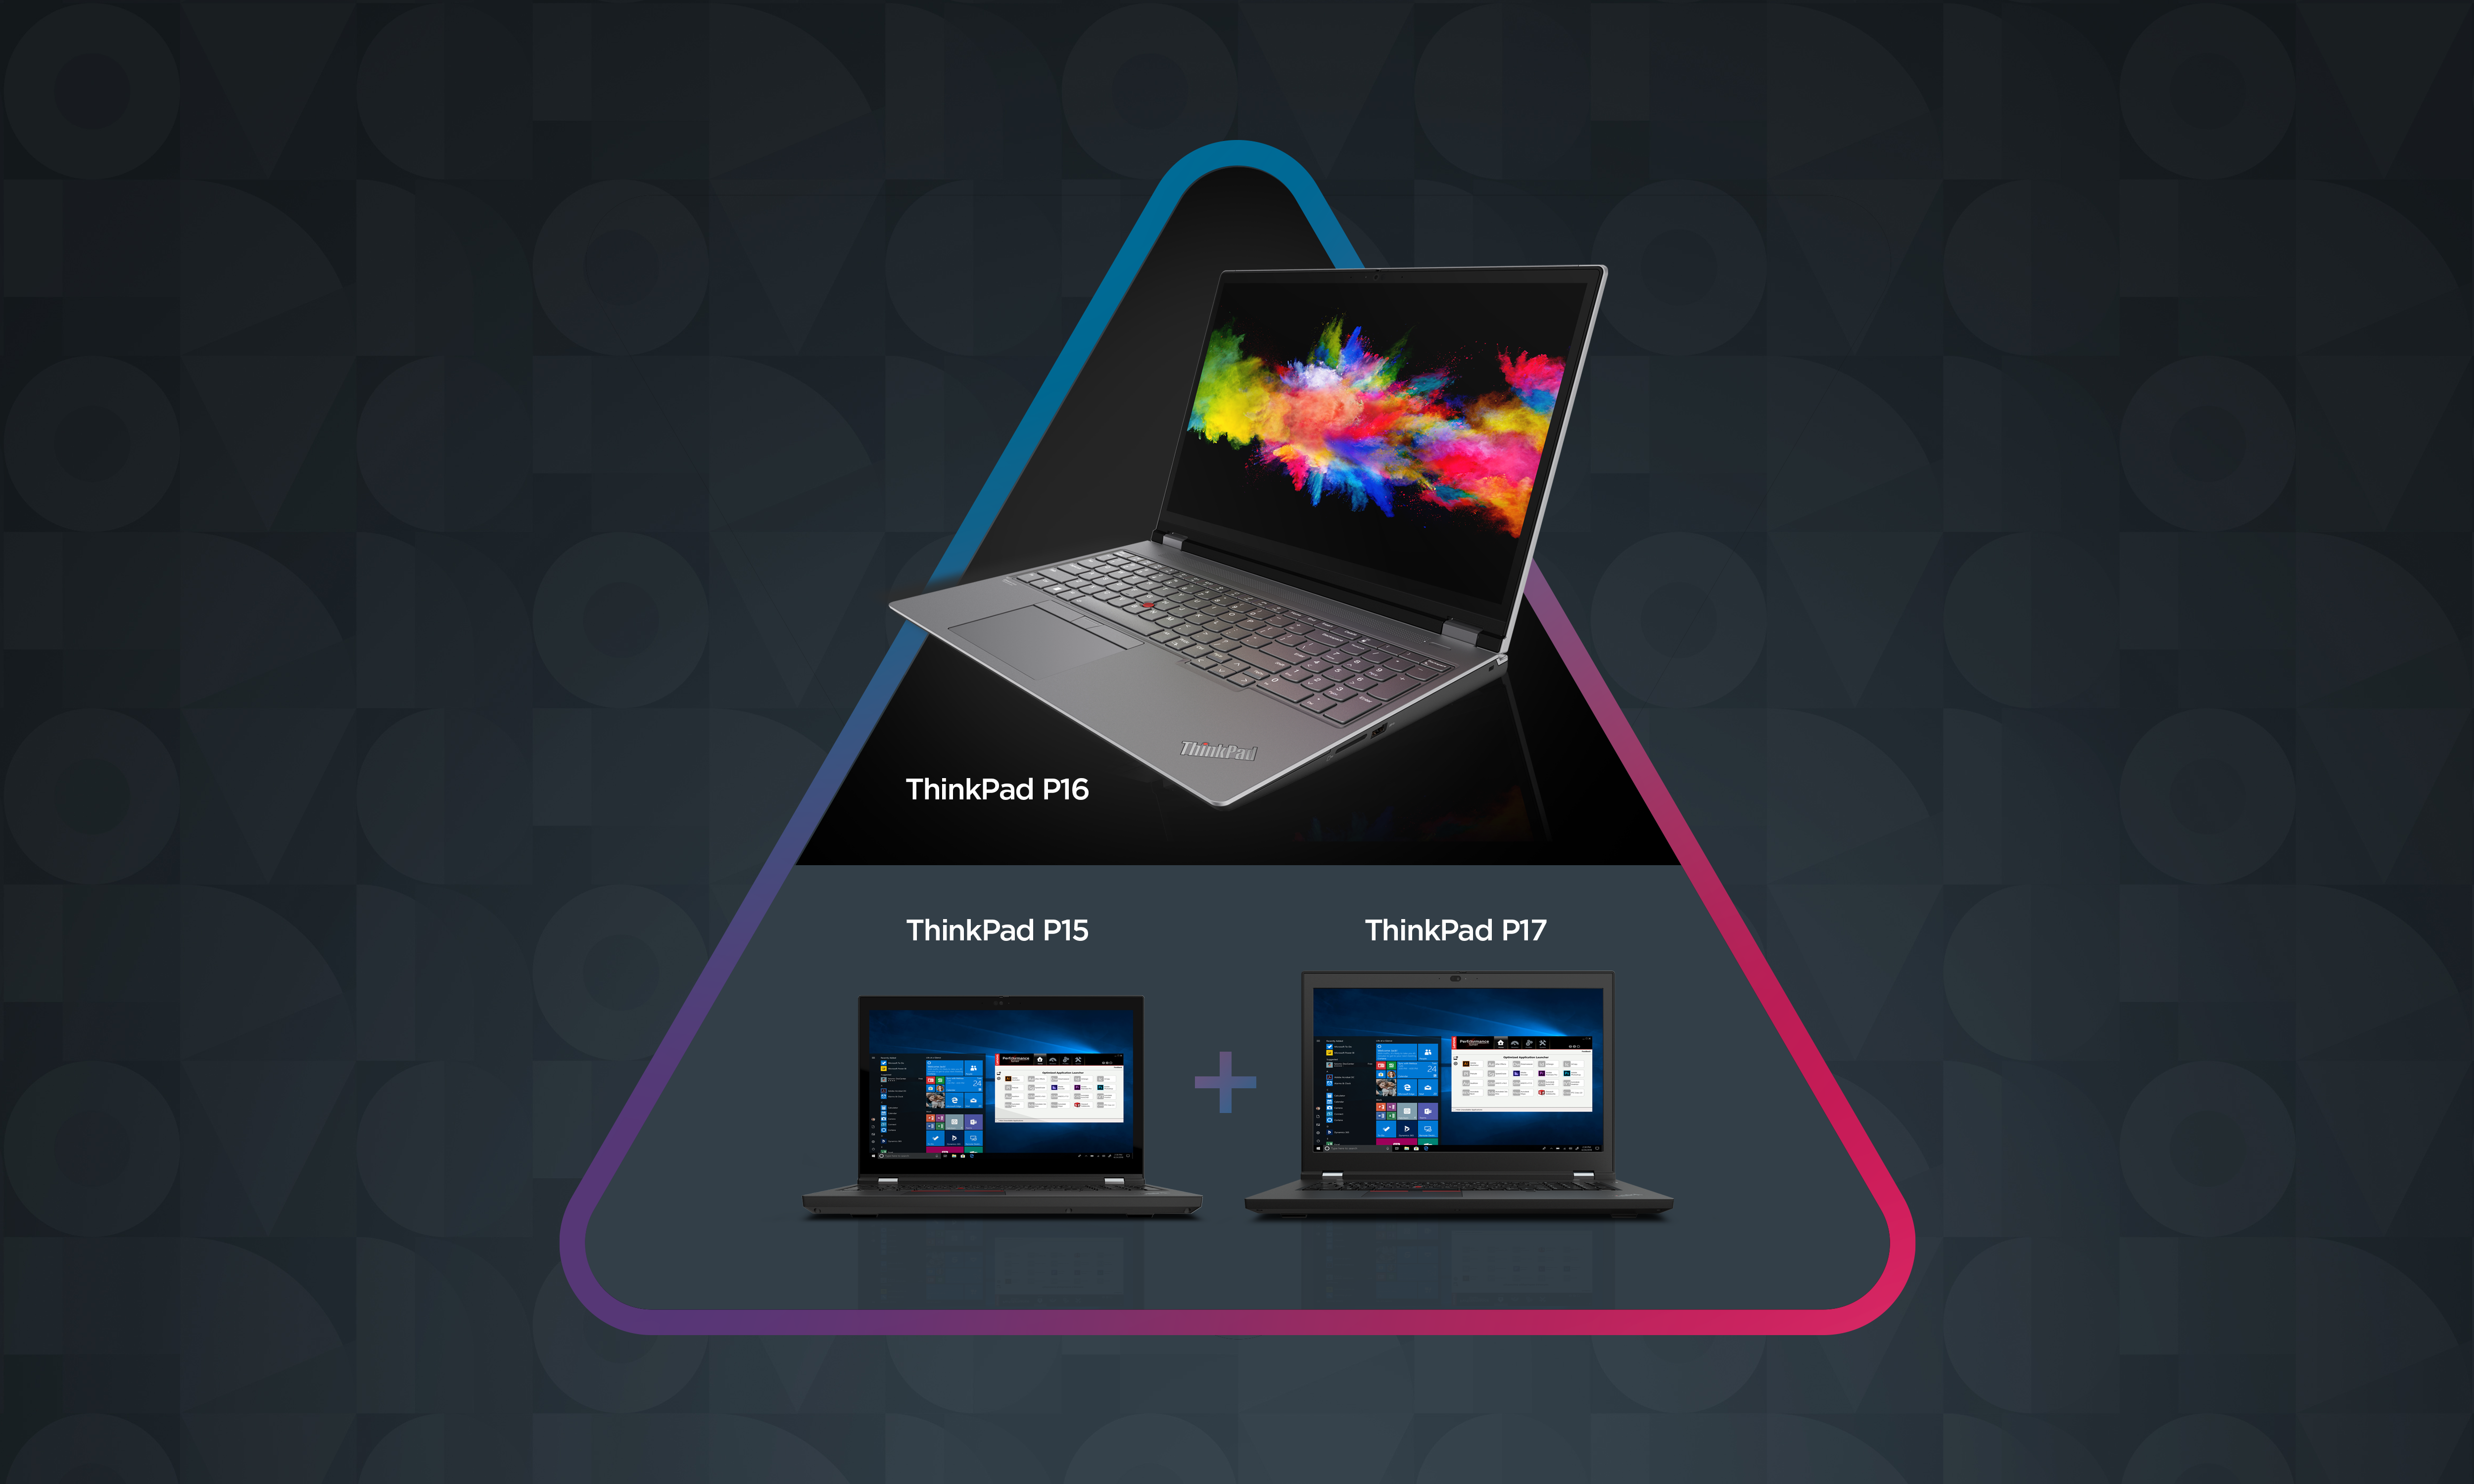 Lenovo introduces the new power-packed P16